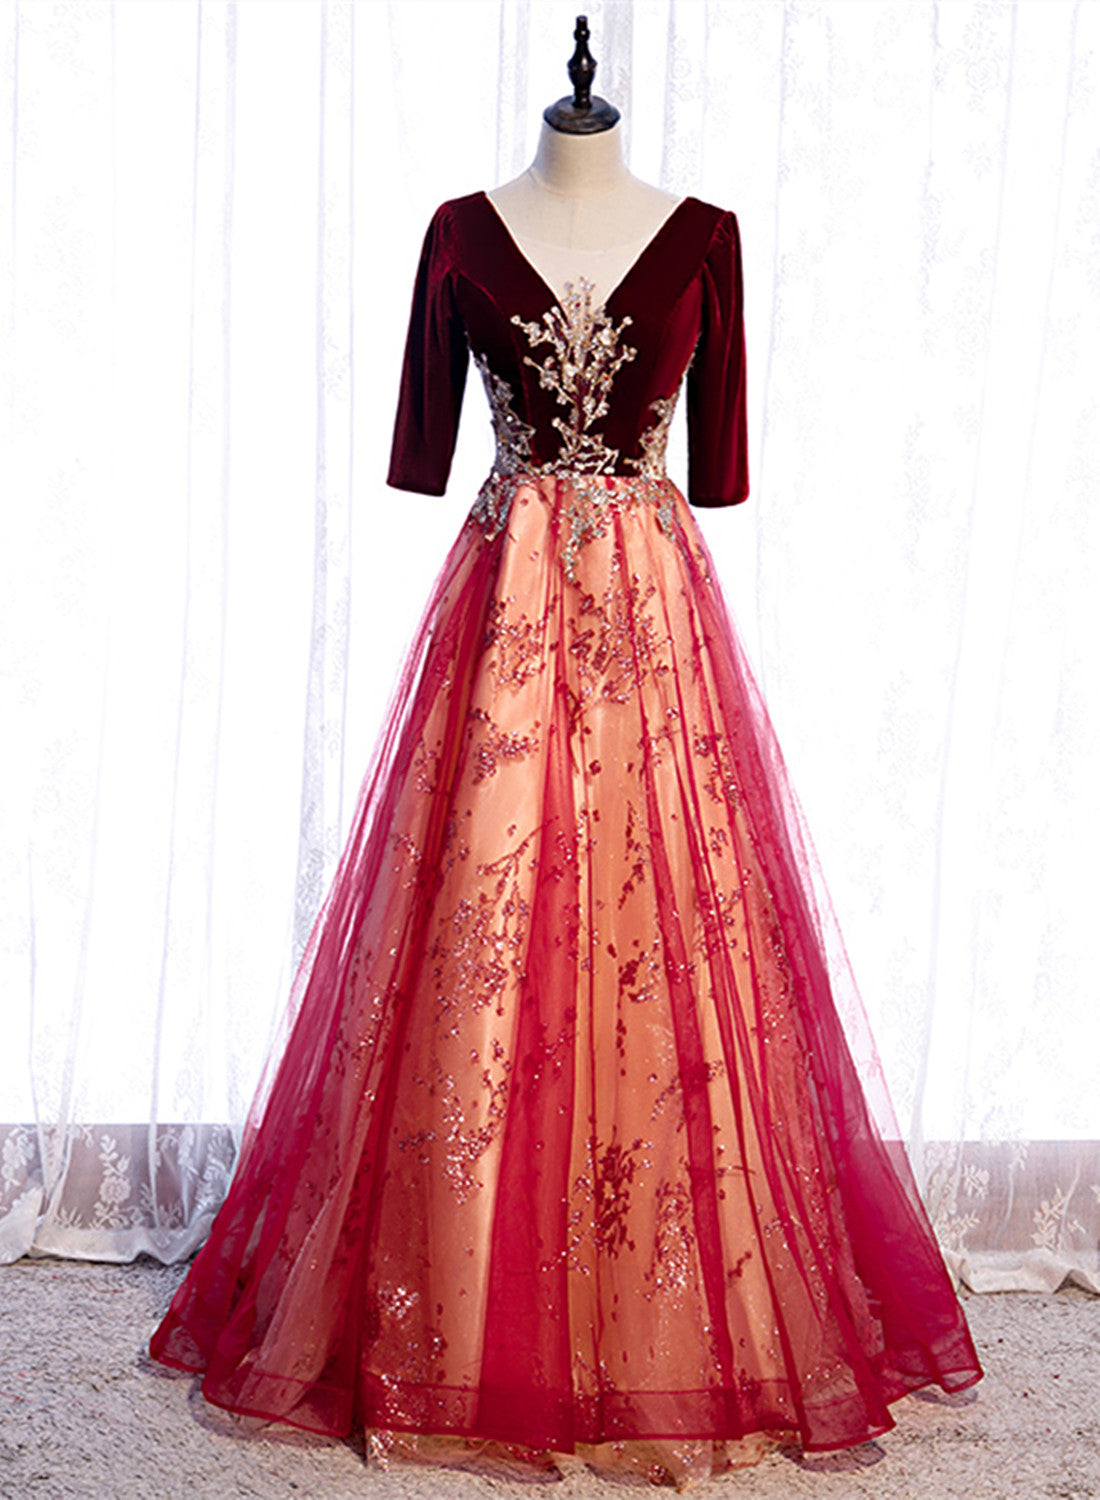 Formal Dresses Outfit, Wine Red Velvet 1/2 Sleeves Long Party Dress with Lace, A-line Junior Prom Dress